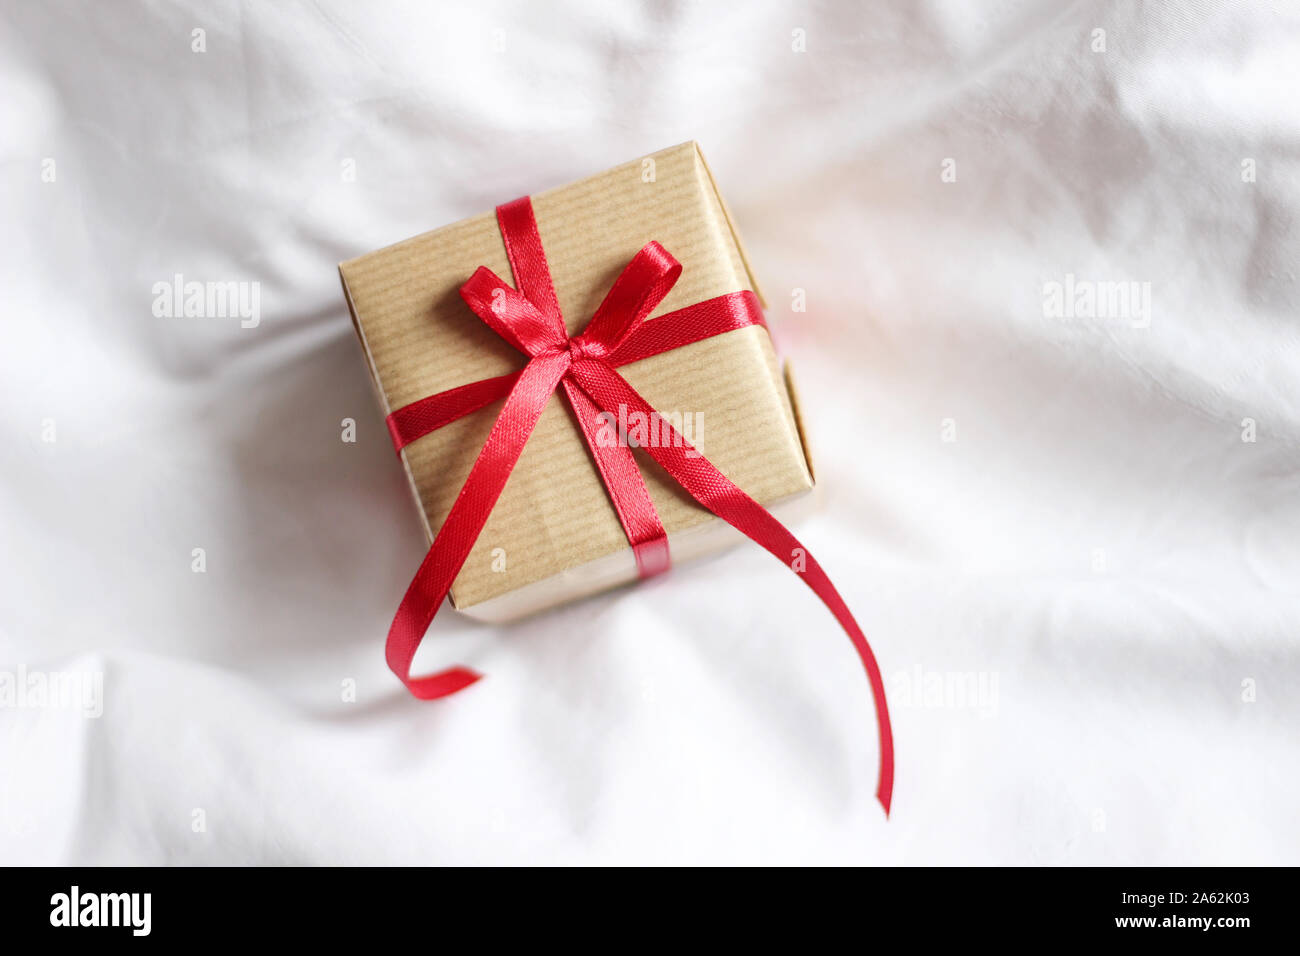 Closeup of Stylish Decorated Gift Box. Holidays Gifts. Christmas  Present Box Isolated on White Bed Background Stock Photo